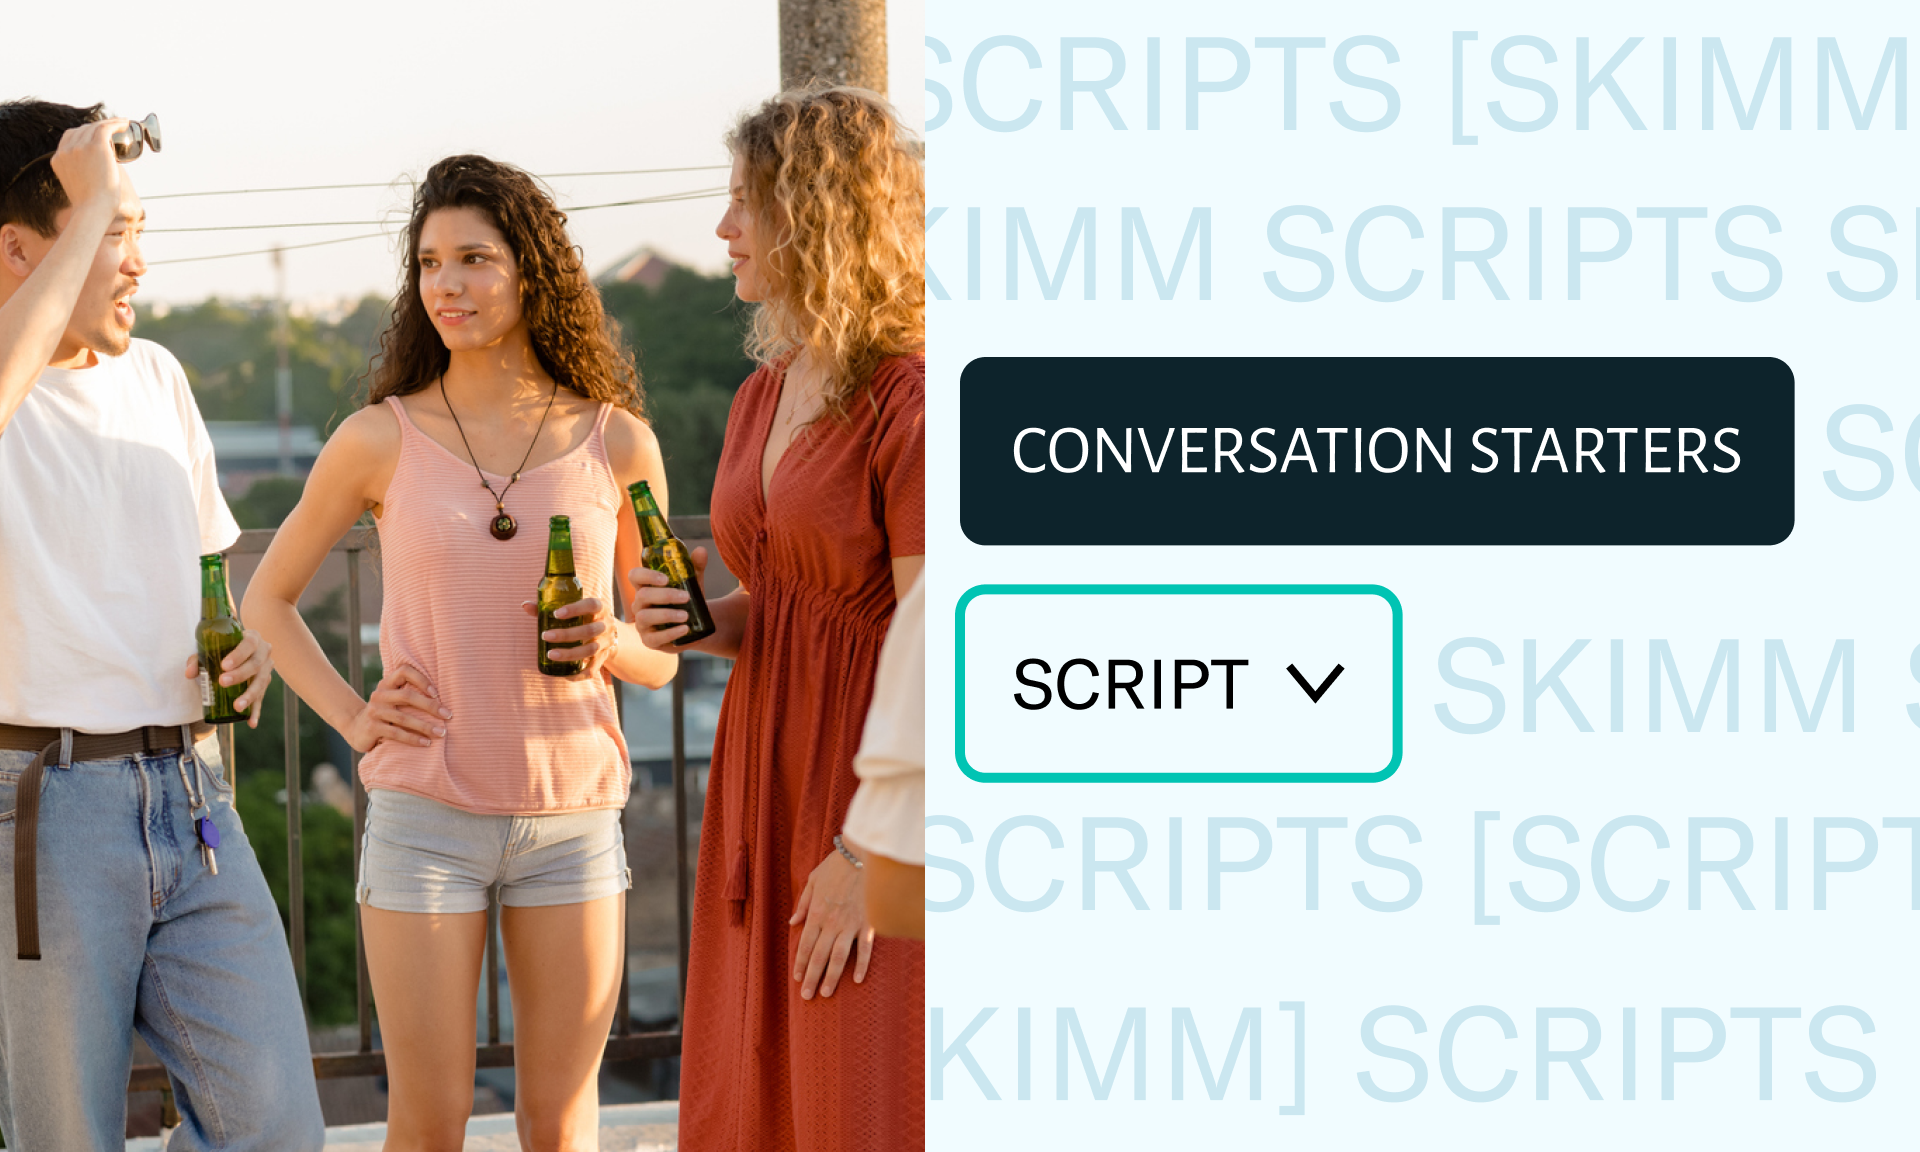 On the left: Three people talking. On the right: Text that says 'conversation starters, script'